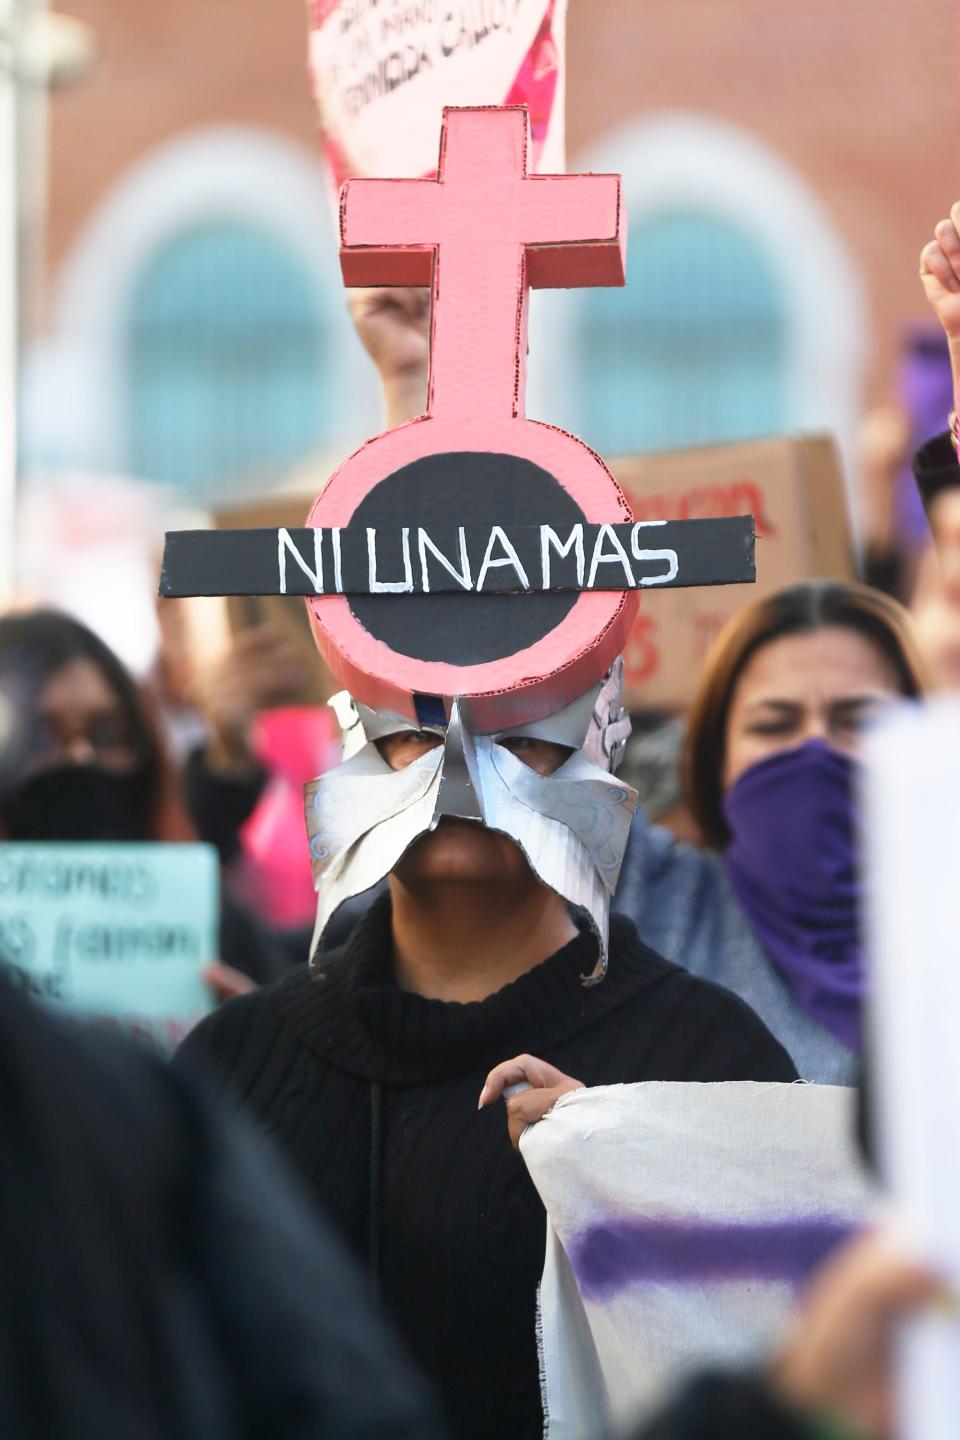 Protesters gather in front of the Museum of the Revolution in Juarez in a march on Jan. 25, 2020, demanding justice for the murder Juarez artist and activist Isabel Cabanillas.